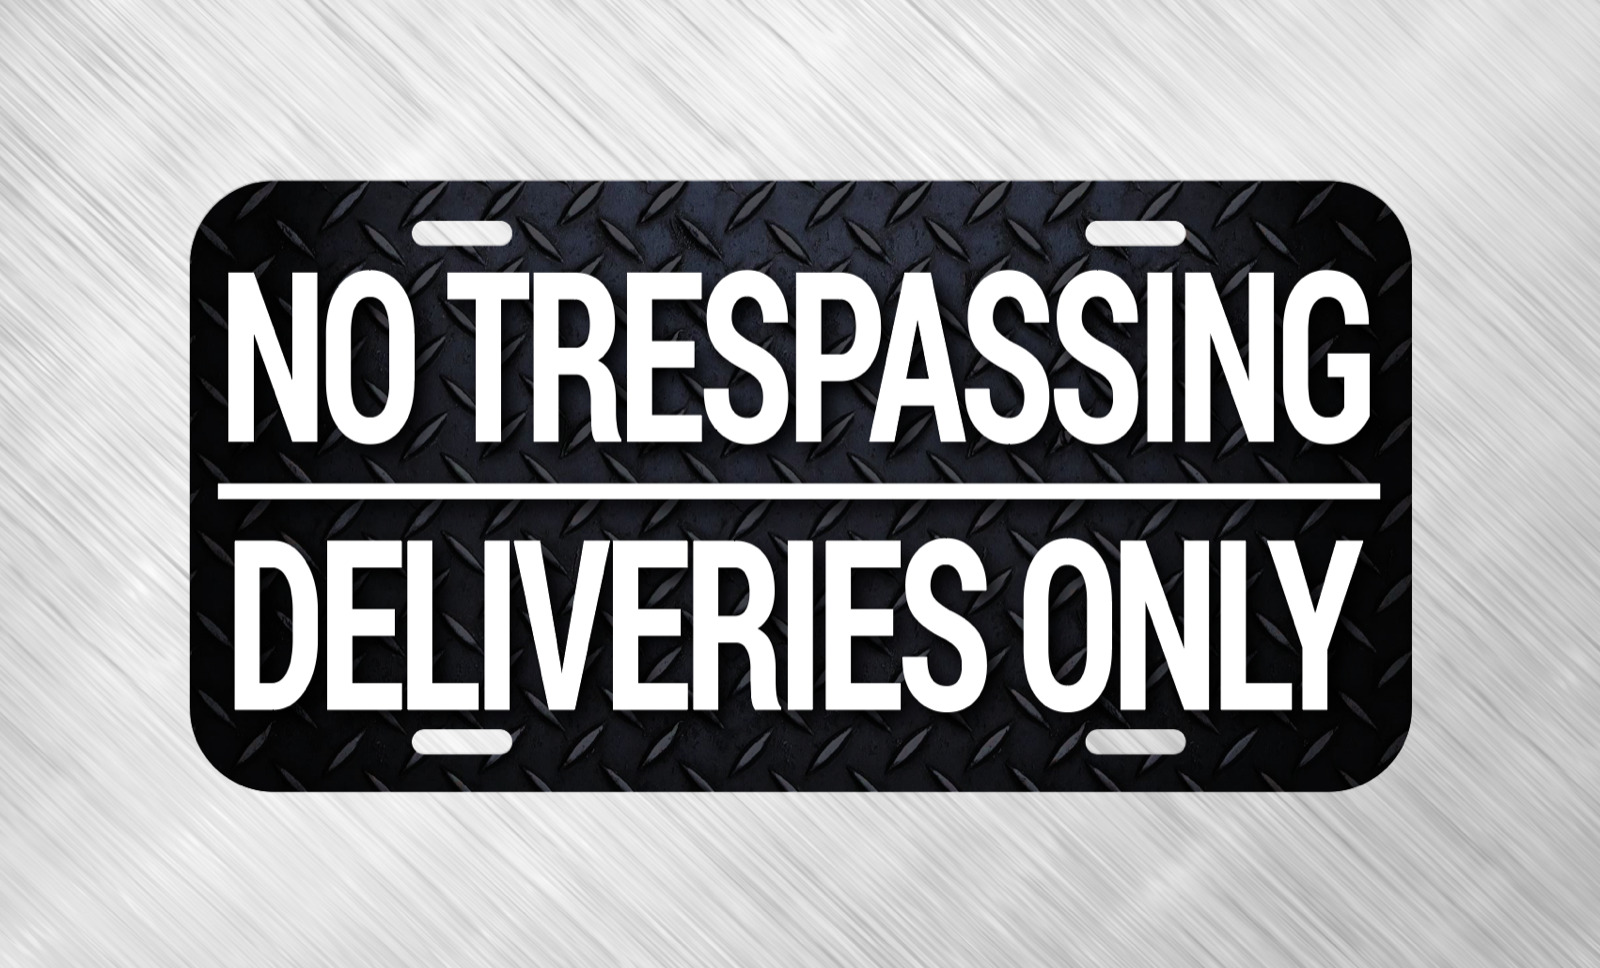 NO TRESPASSING DELIVERIES ONLY ROAD GATE SIGN UPS FEDEX USPS HOUSE  